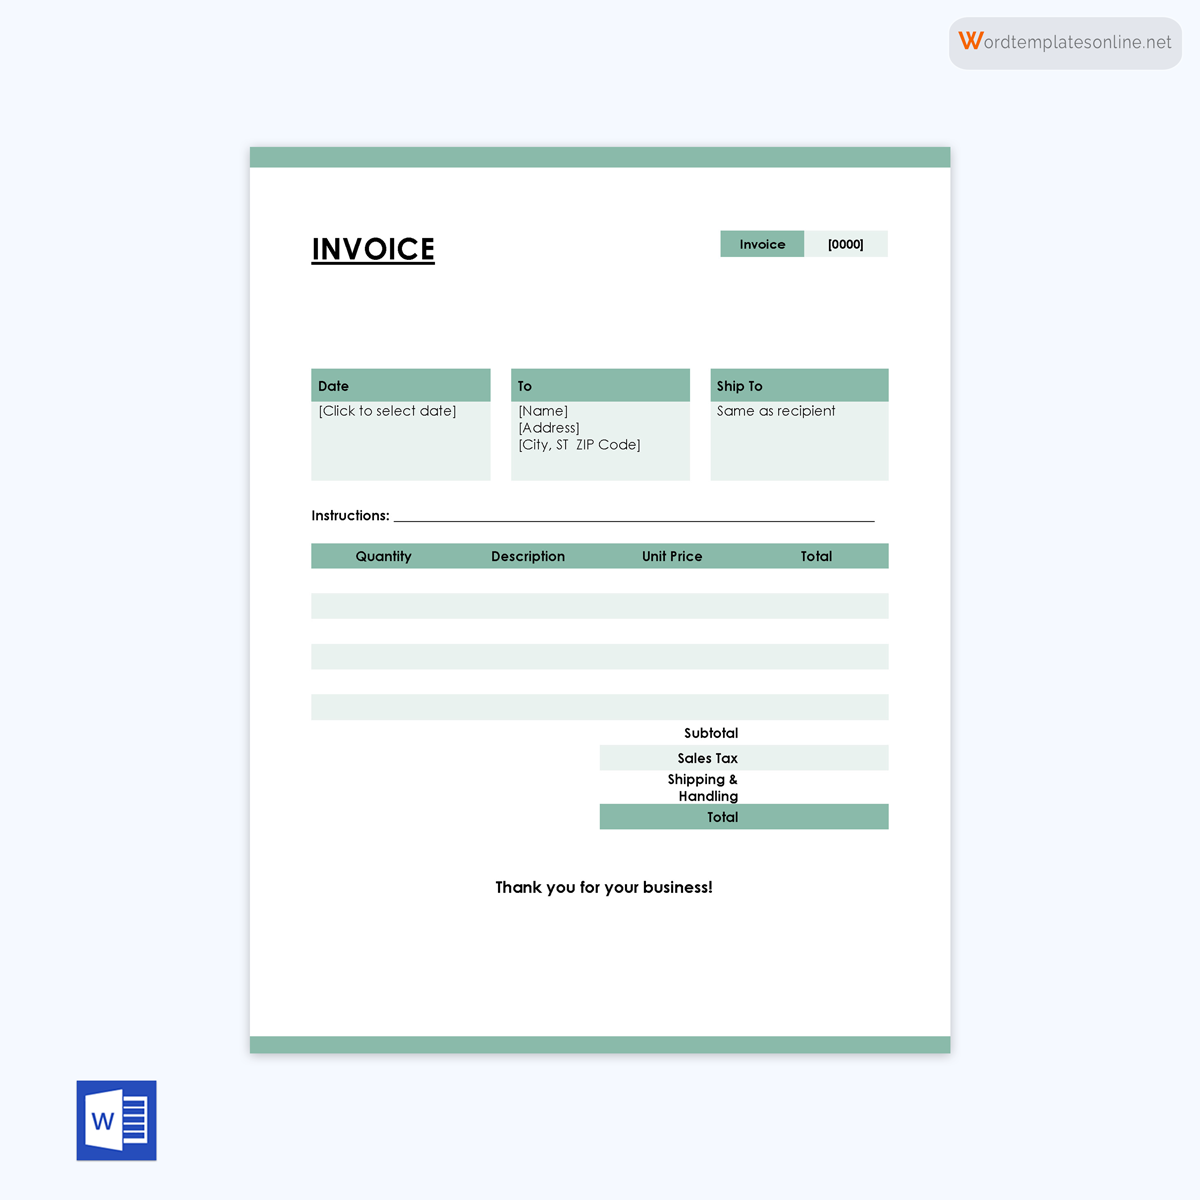 Printable invoice template with Word